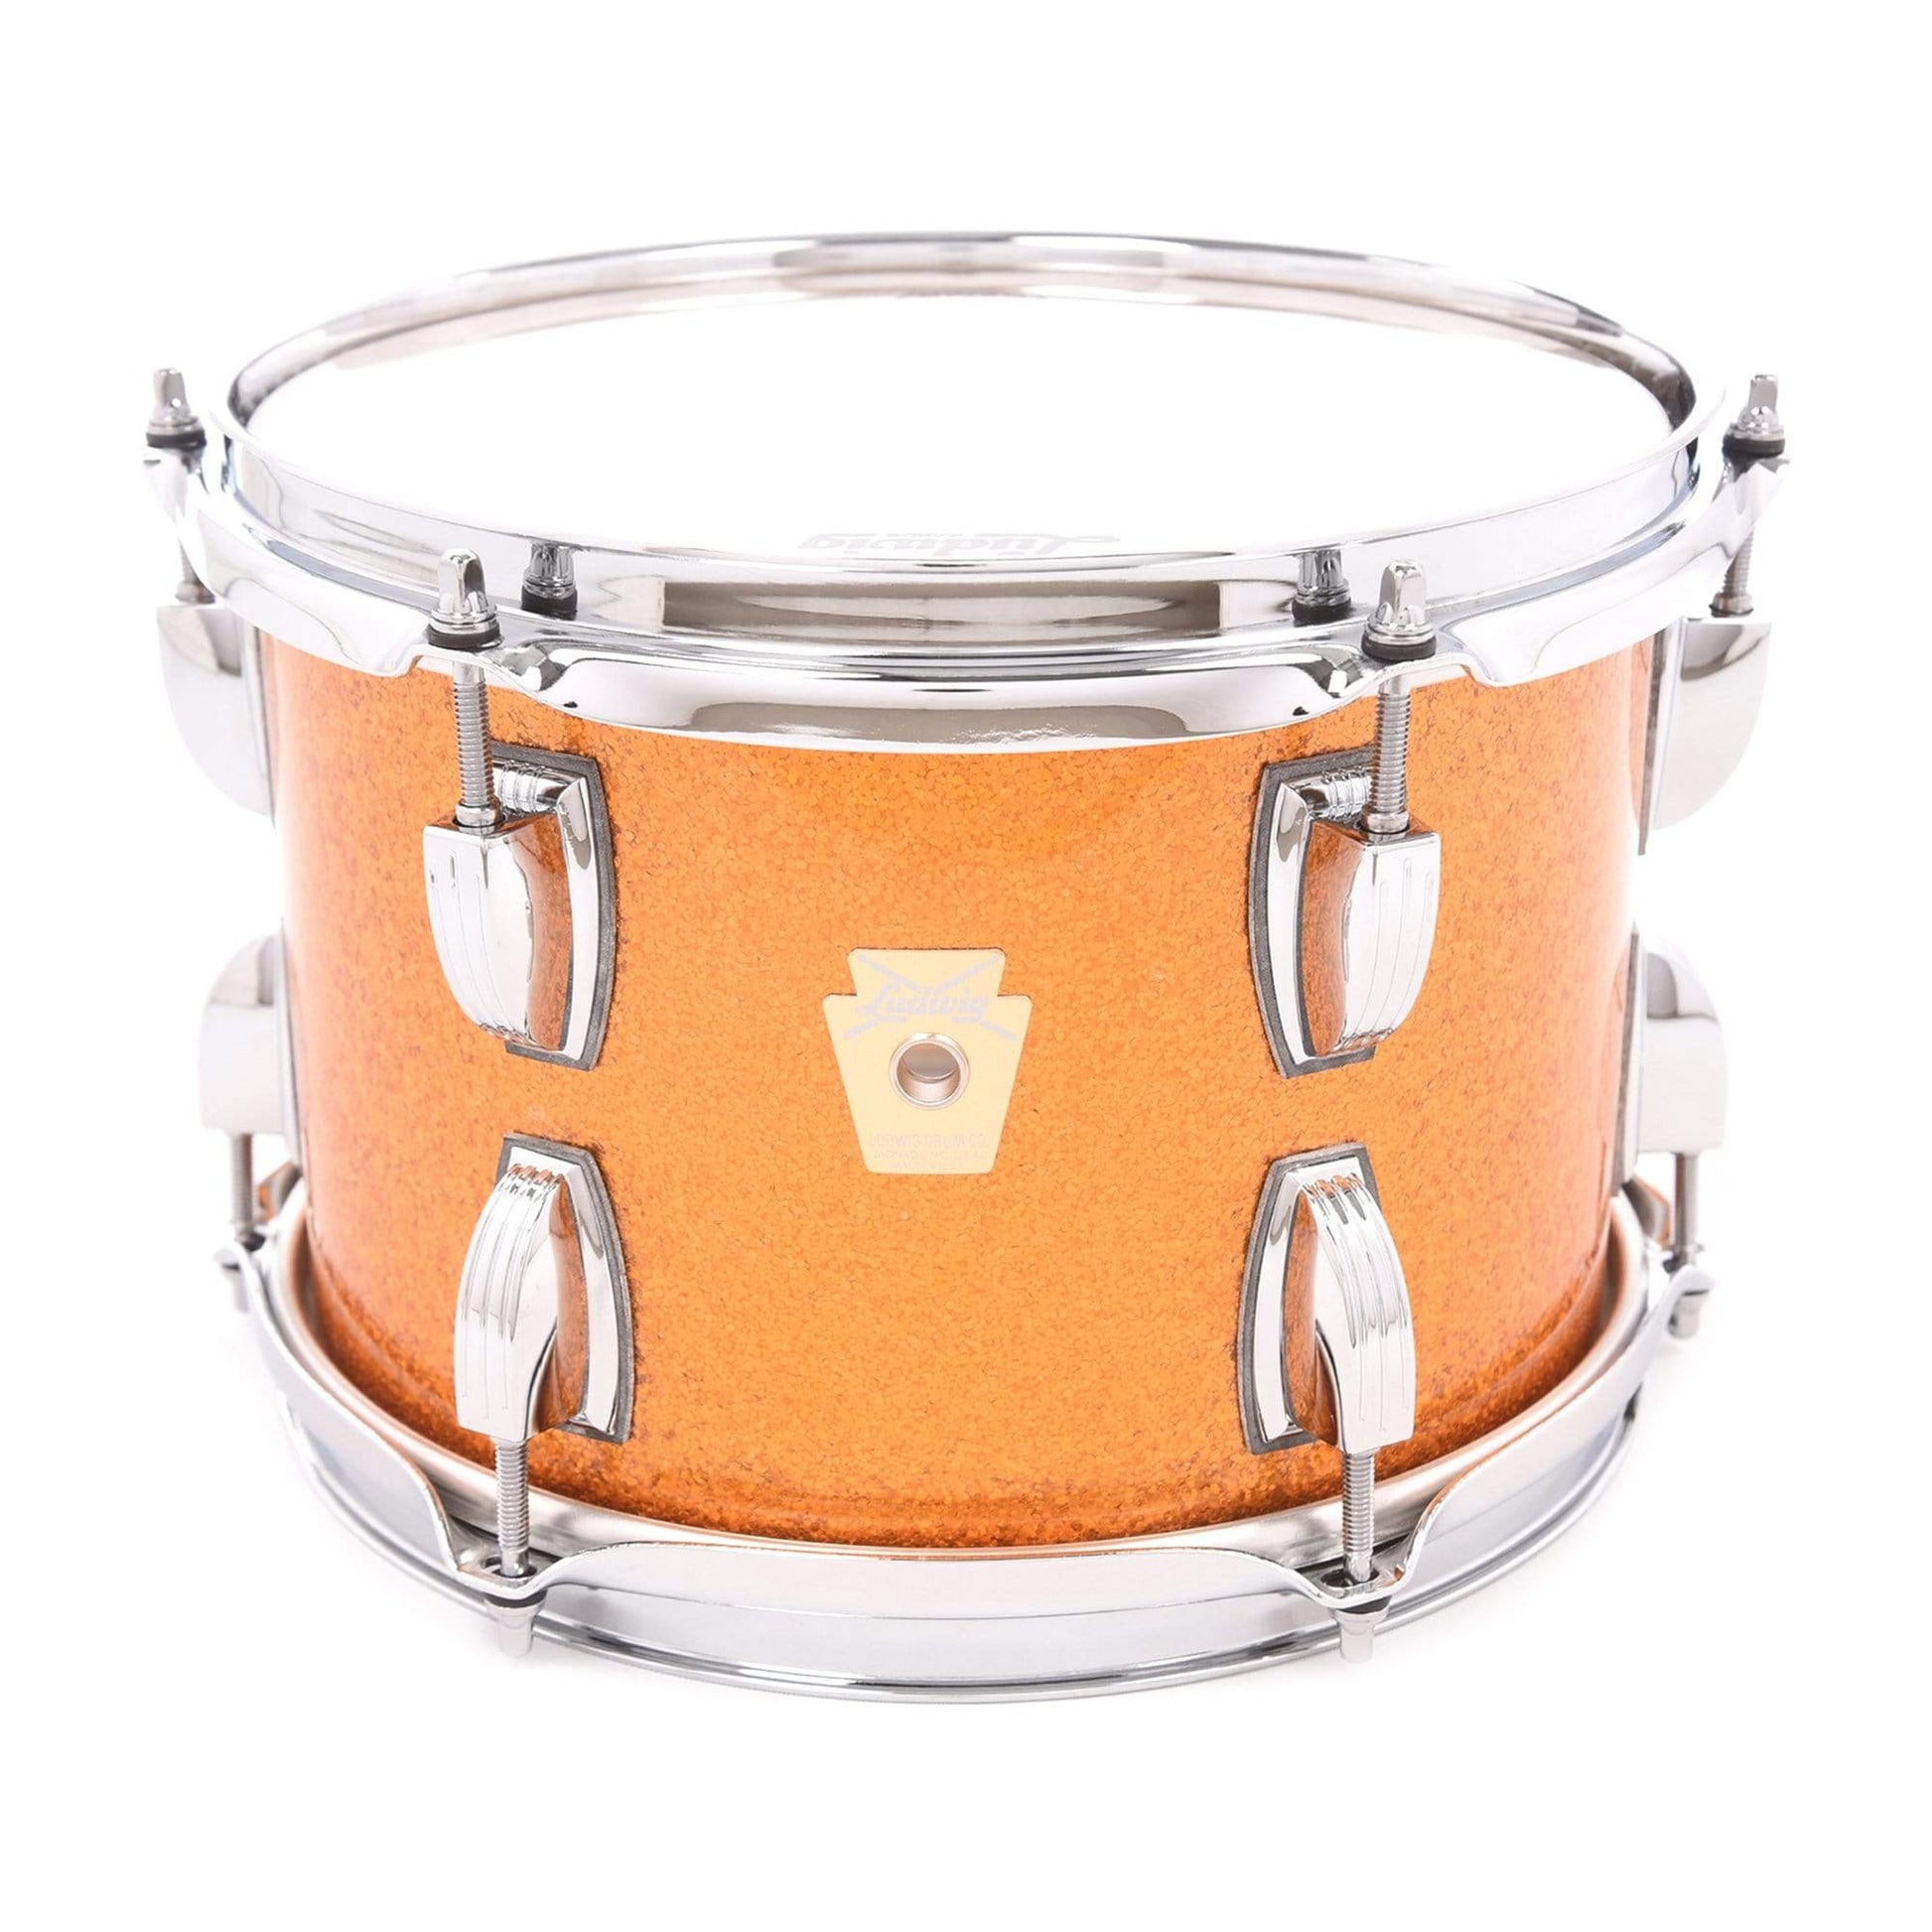 Ludwig Classic Maple 7x10 Tom Gold Sparkle w/Large Keystone Badge & No Mount Drums and Percussion / Acoustic Drums / Tom